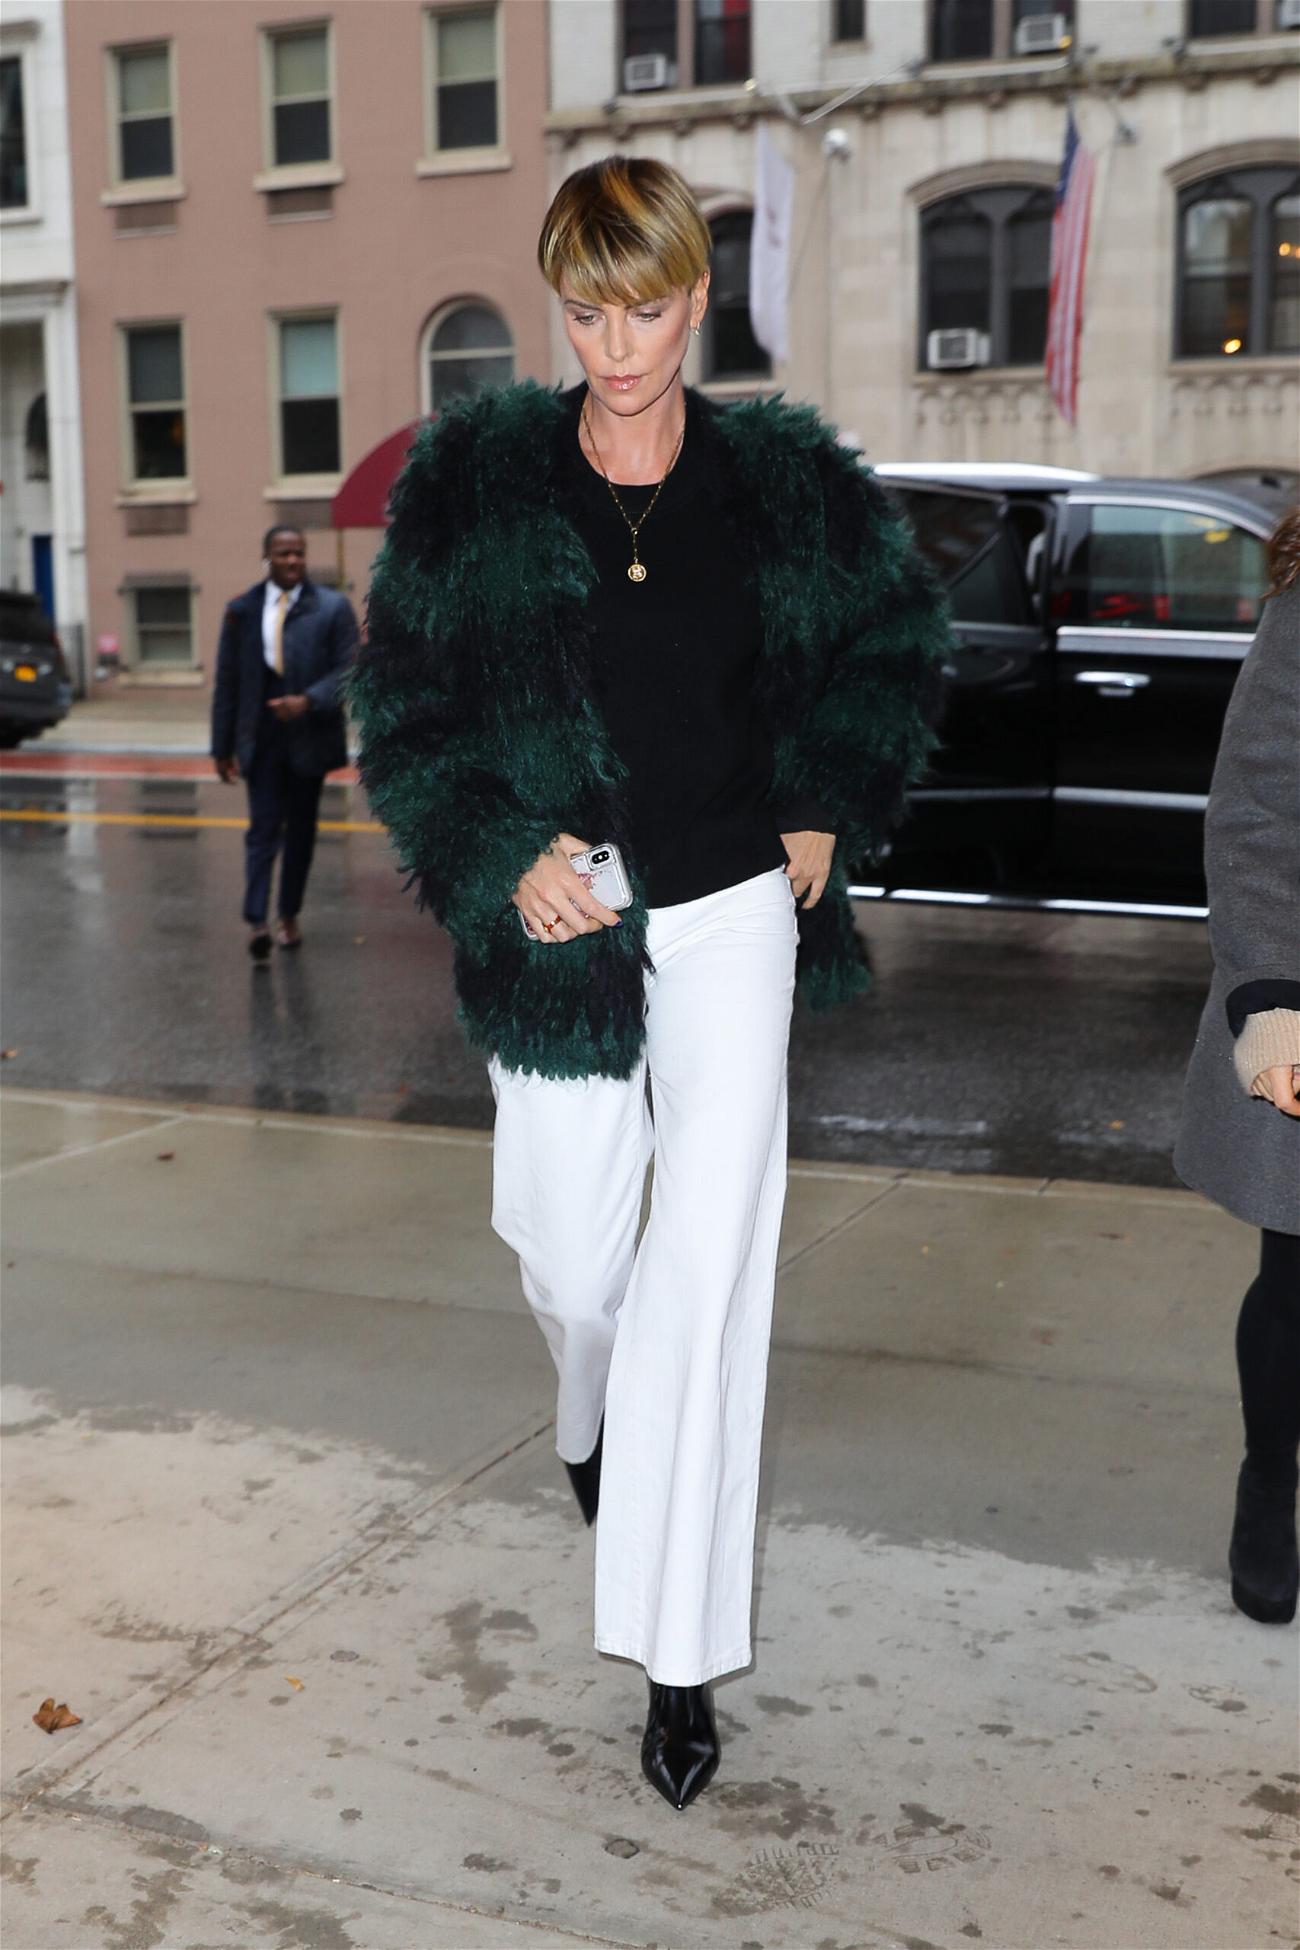 Charlize Theron was spotted and appeared in NYC on October 20, 2019